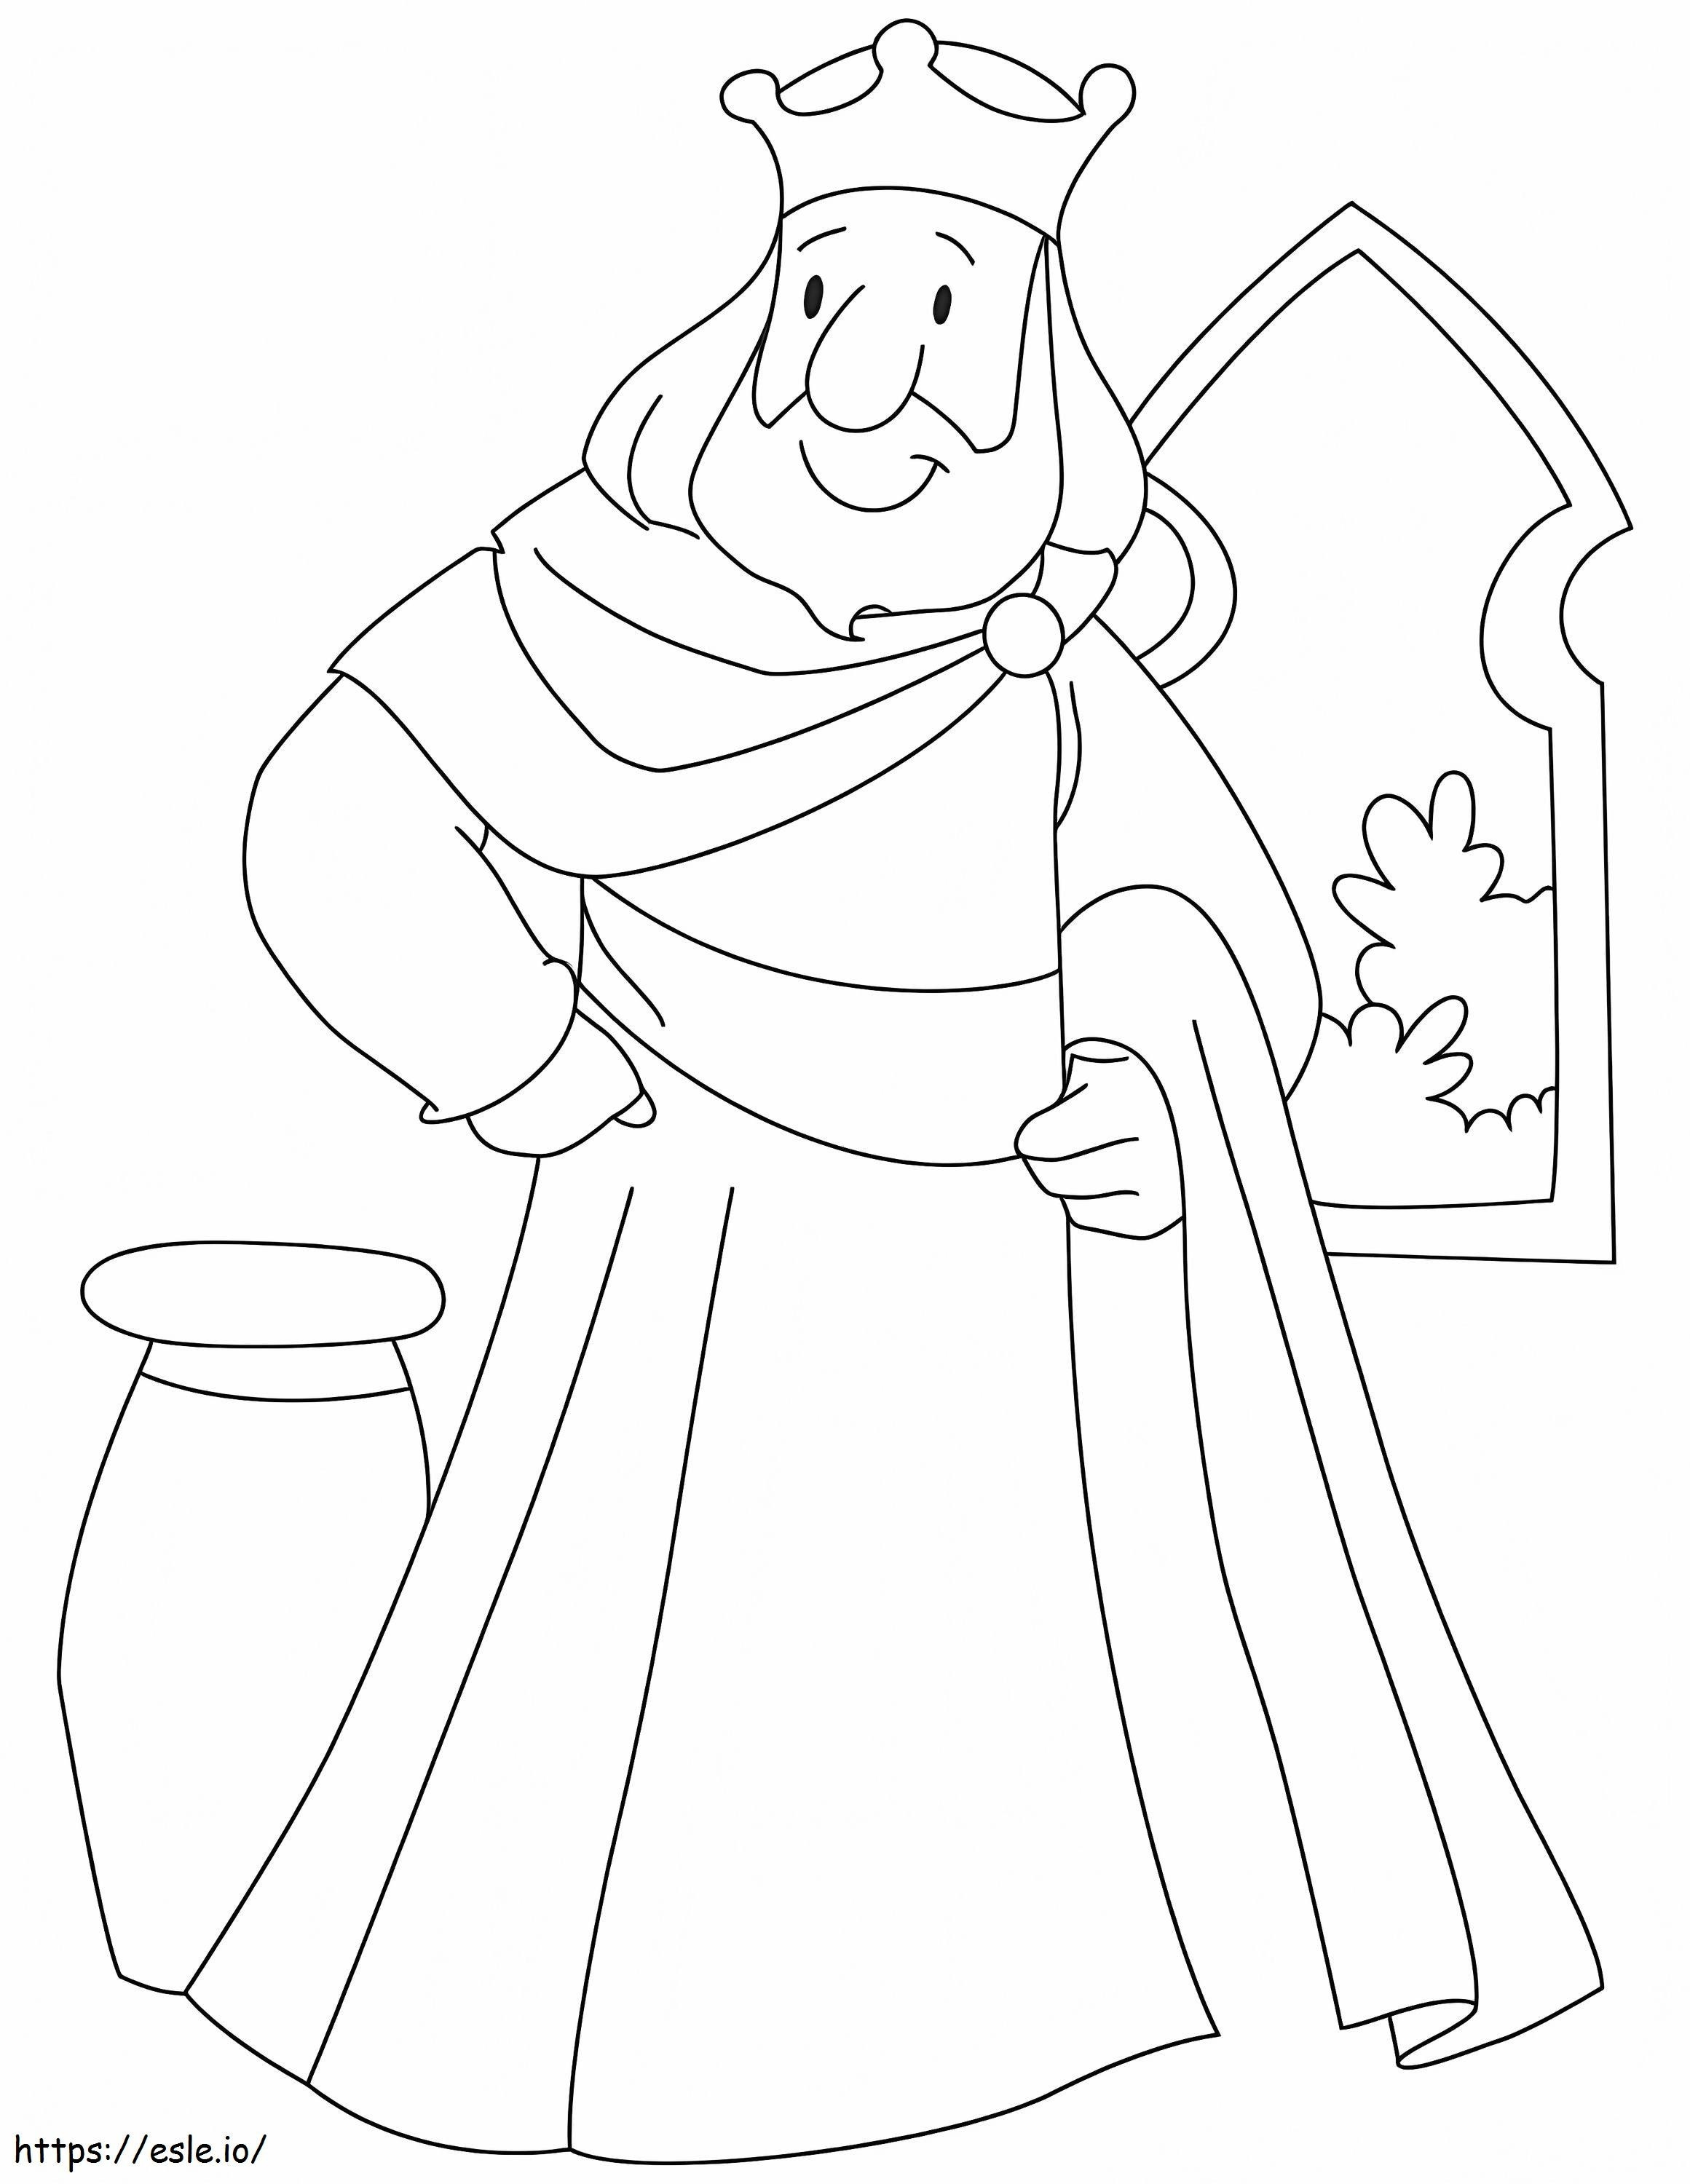 The King Laughs In The Palace coloring page